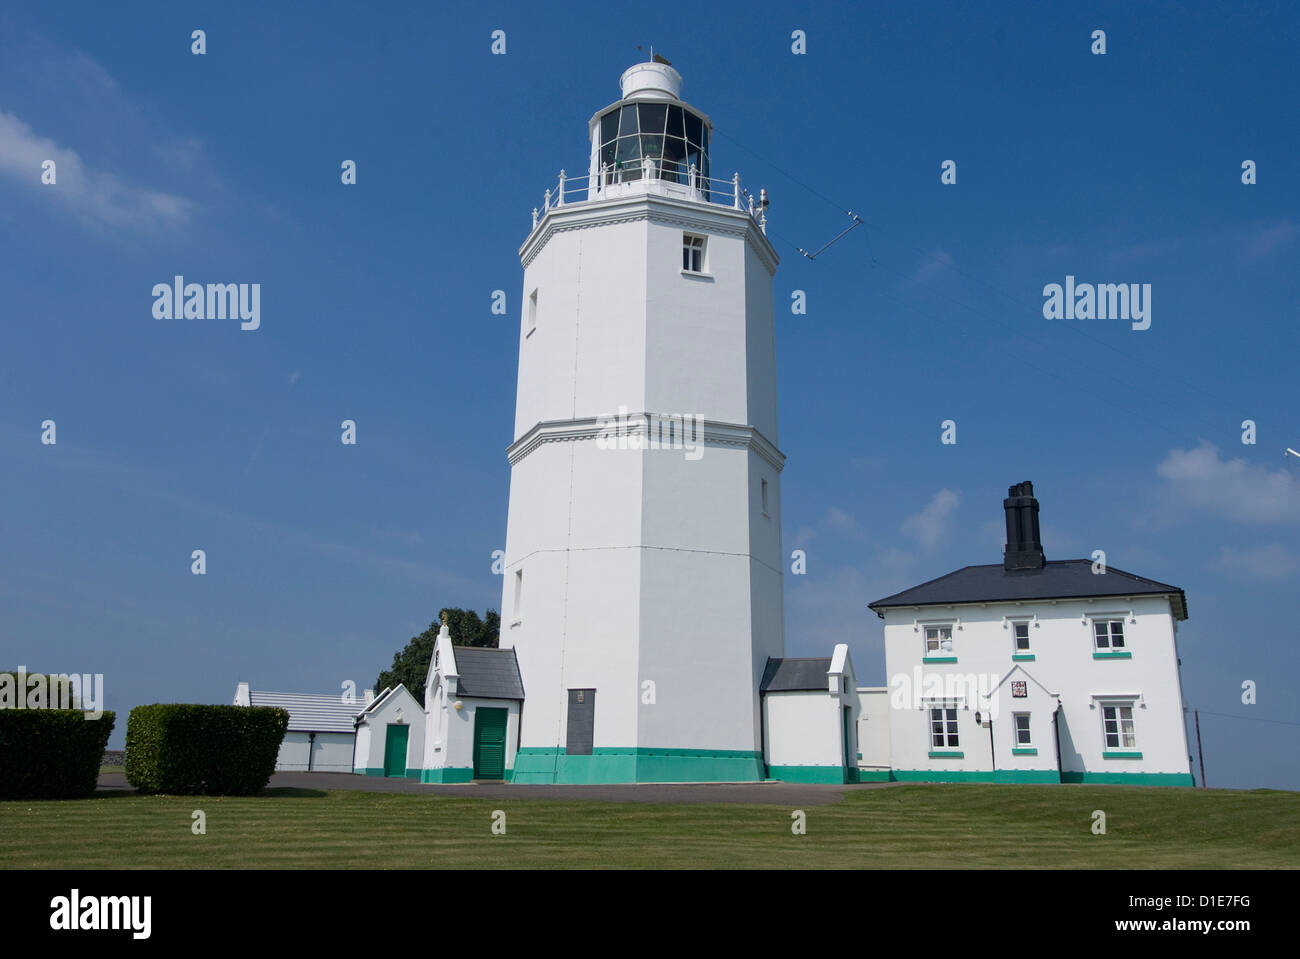 North Foreland Lighthouse, Broadstairs, Kent, Angleterre, Royaume-Uni, Europe Banque D'Images